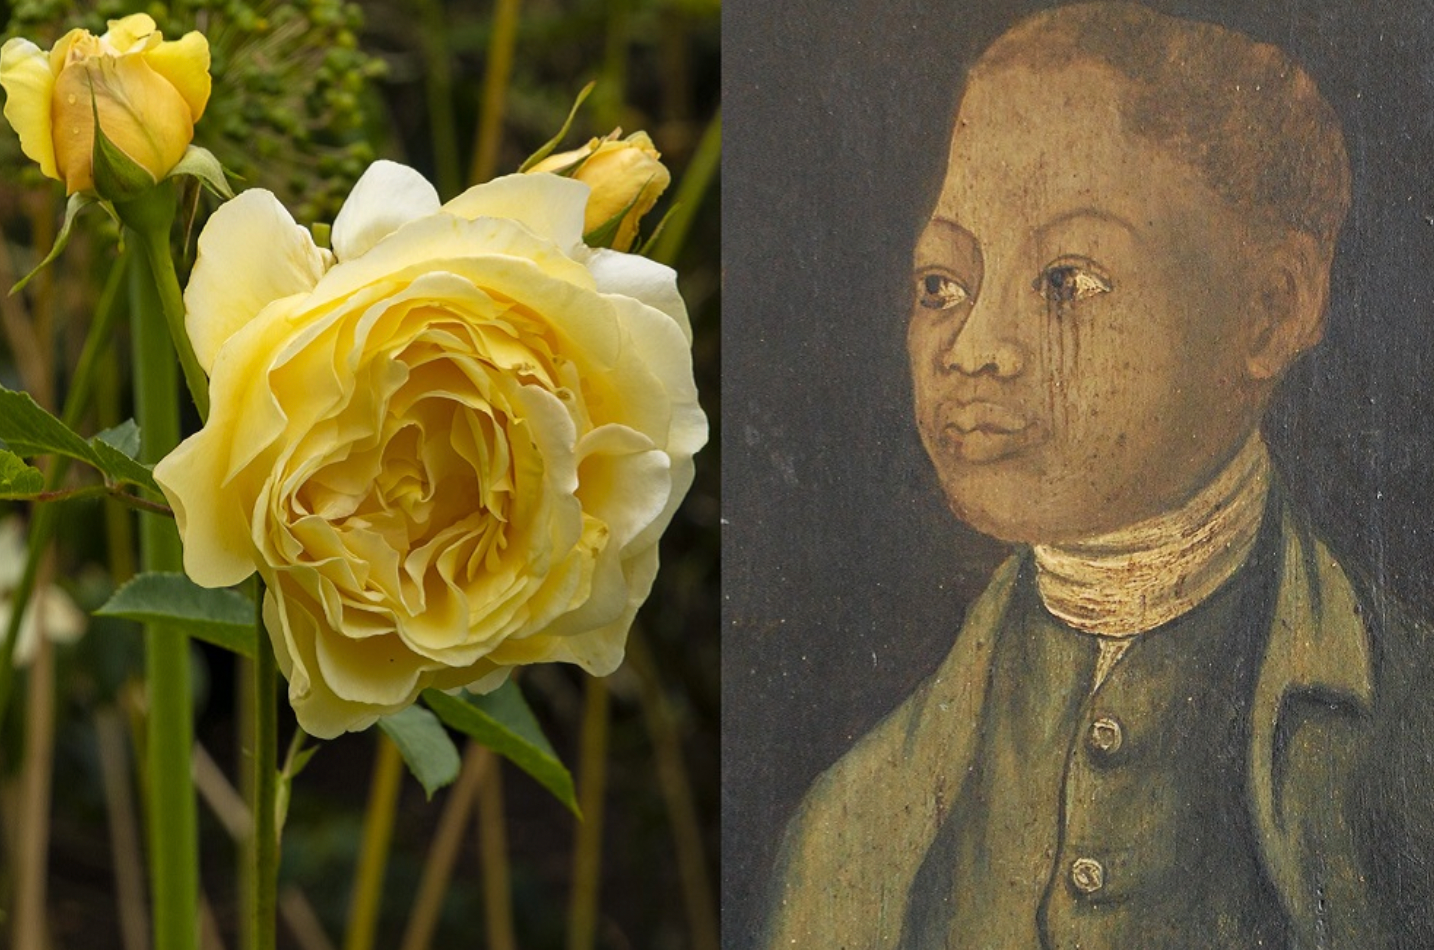 John Ystumllyn: A Gardening Pioneer Honored with a Unique Rose